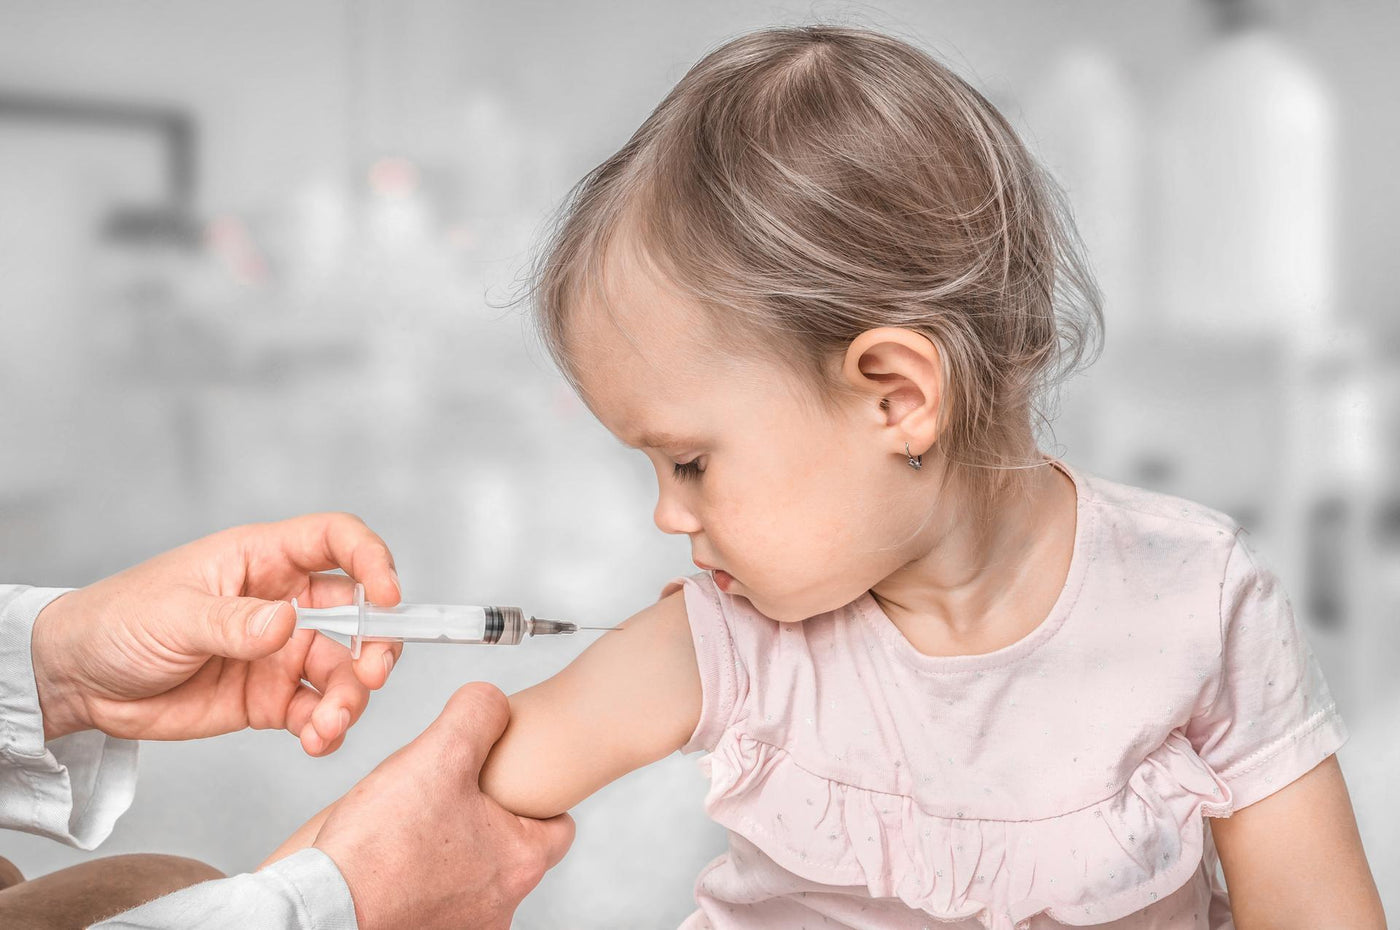 Your Child's Health: A Parent's Guide to Vaccination